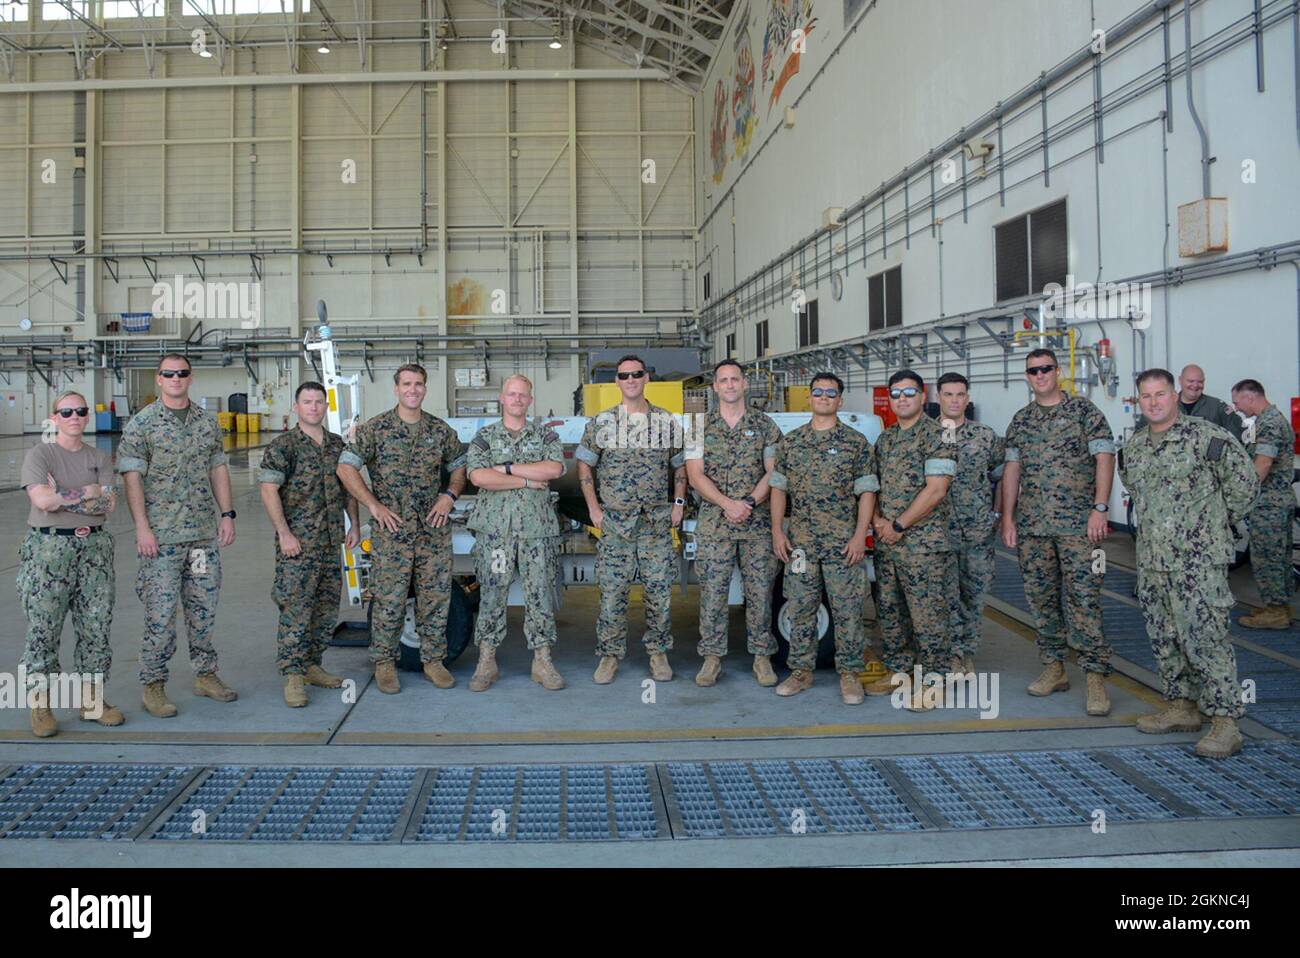 210604-N-SR472-0004 KADENA AIR BASE, Japan (June 4, 2021)  Patrol Squadron (VP) 45 Aviation Ordnancemen and Marines from III Marine Expeditionary Force (MEF) Explosive Ordnance Disposal (EOD) team pose for a photo during a training exercise on Kadena Air base, June 4. The training was organized to familiarize the EOD personnel with the P8-A Poseidon weapons system, as well as promote interoperability between forces. Stock Photo